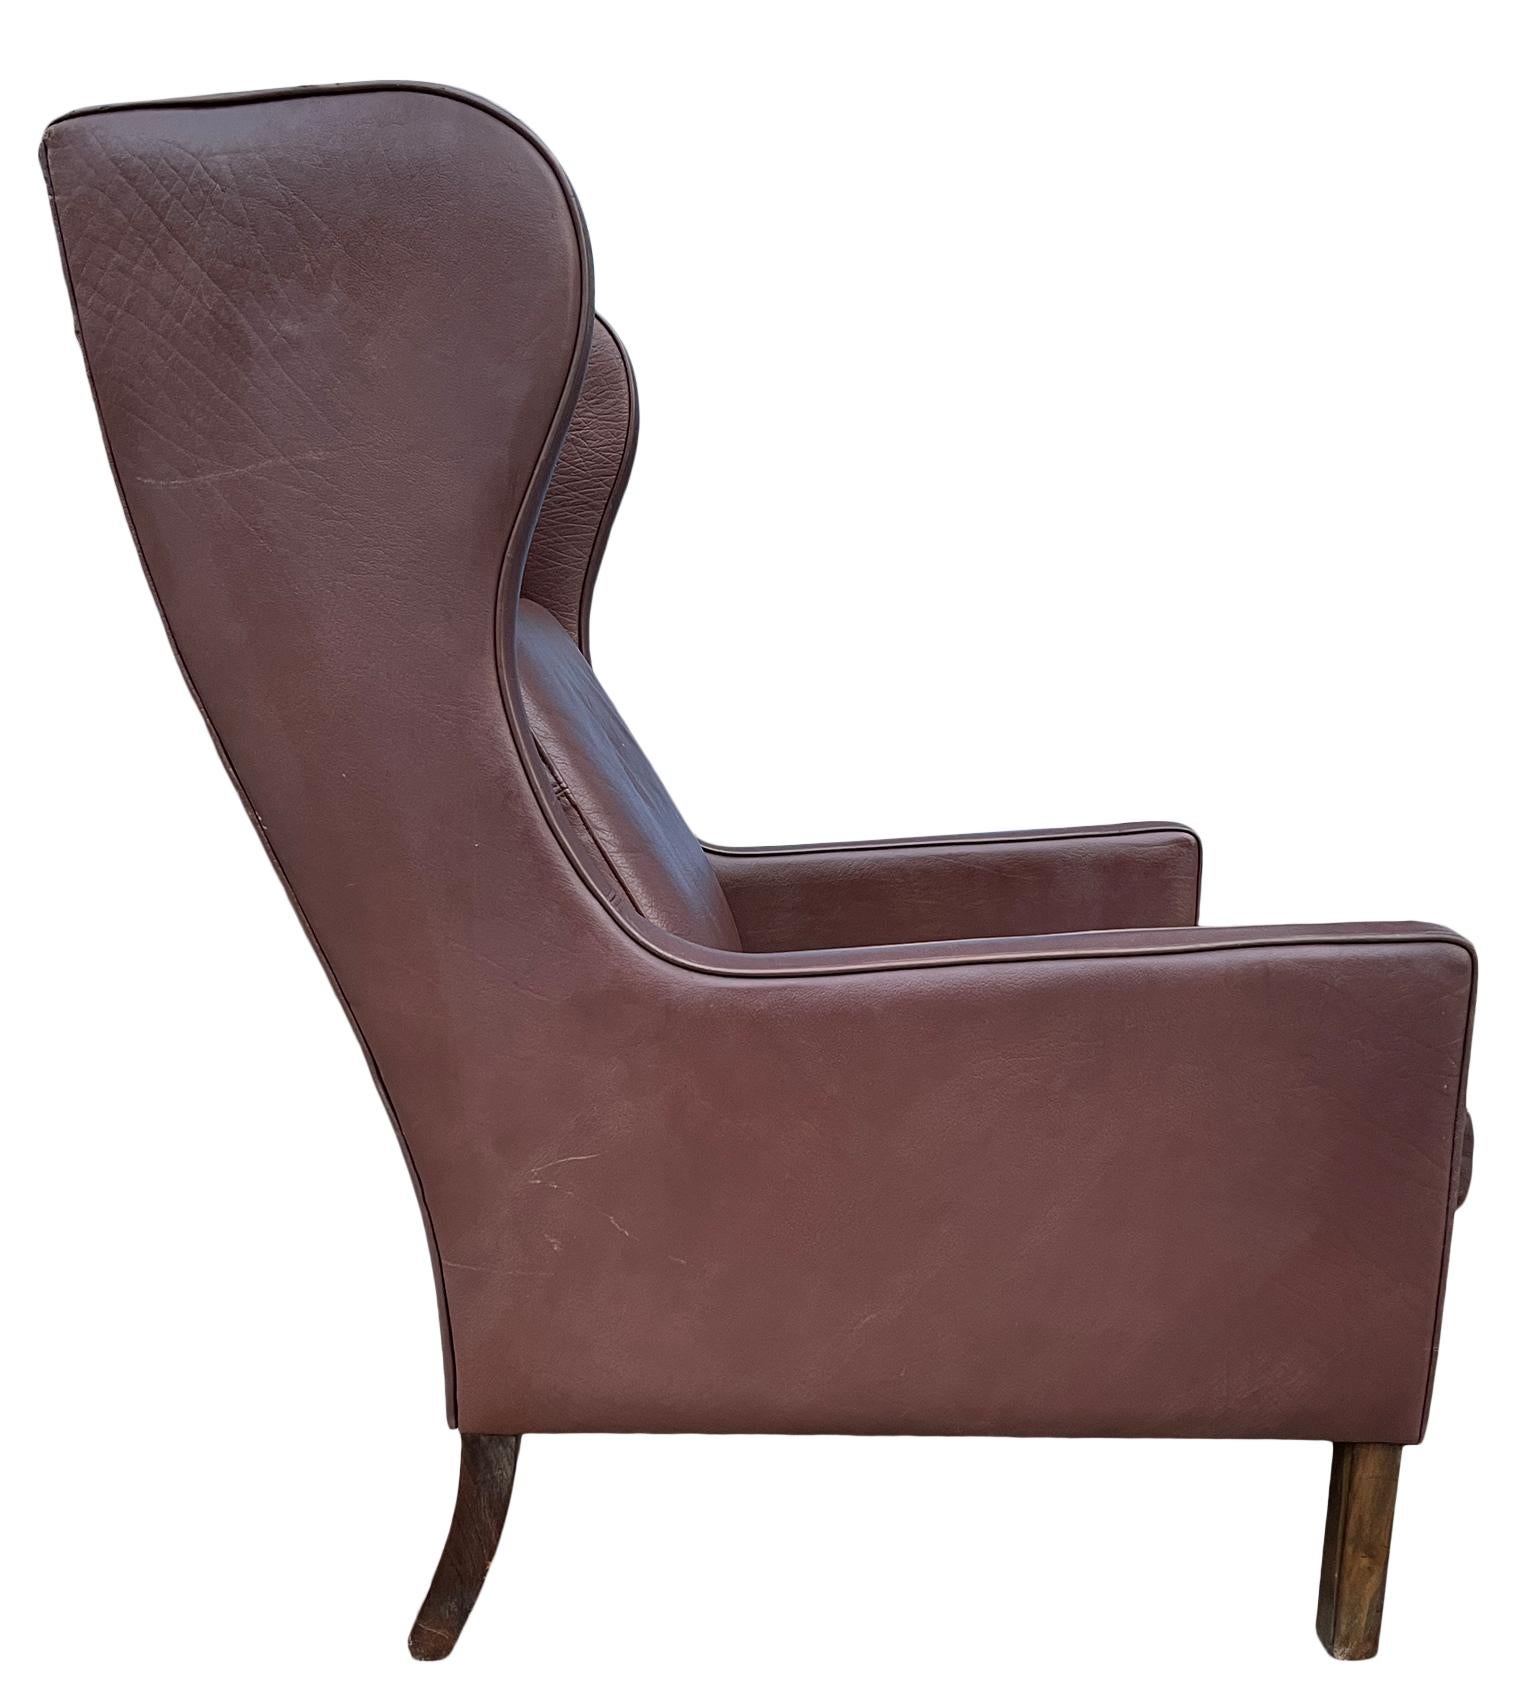 Mid century Danish modern wingback reddish Brown leather fireside chair in the by Børge Mogensen with beautiful patina. Chair shows wear and use. All original vintage used patina. Beautiful Dark reddish Brown leather. Solid teak legs. Made In